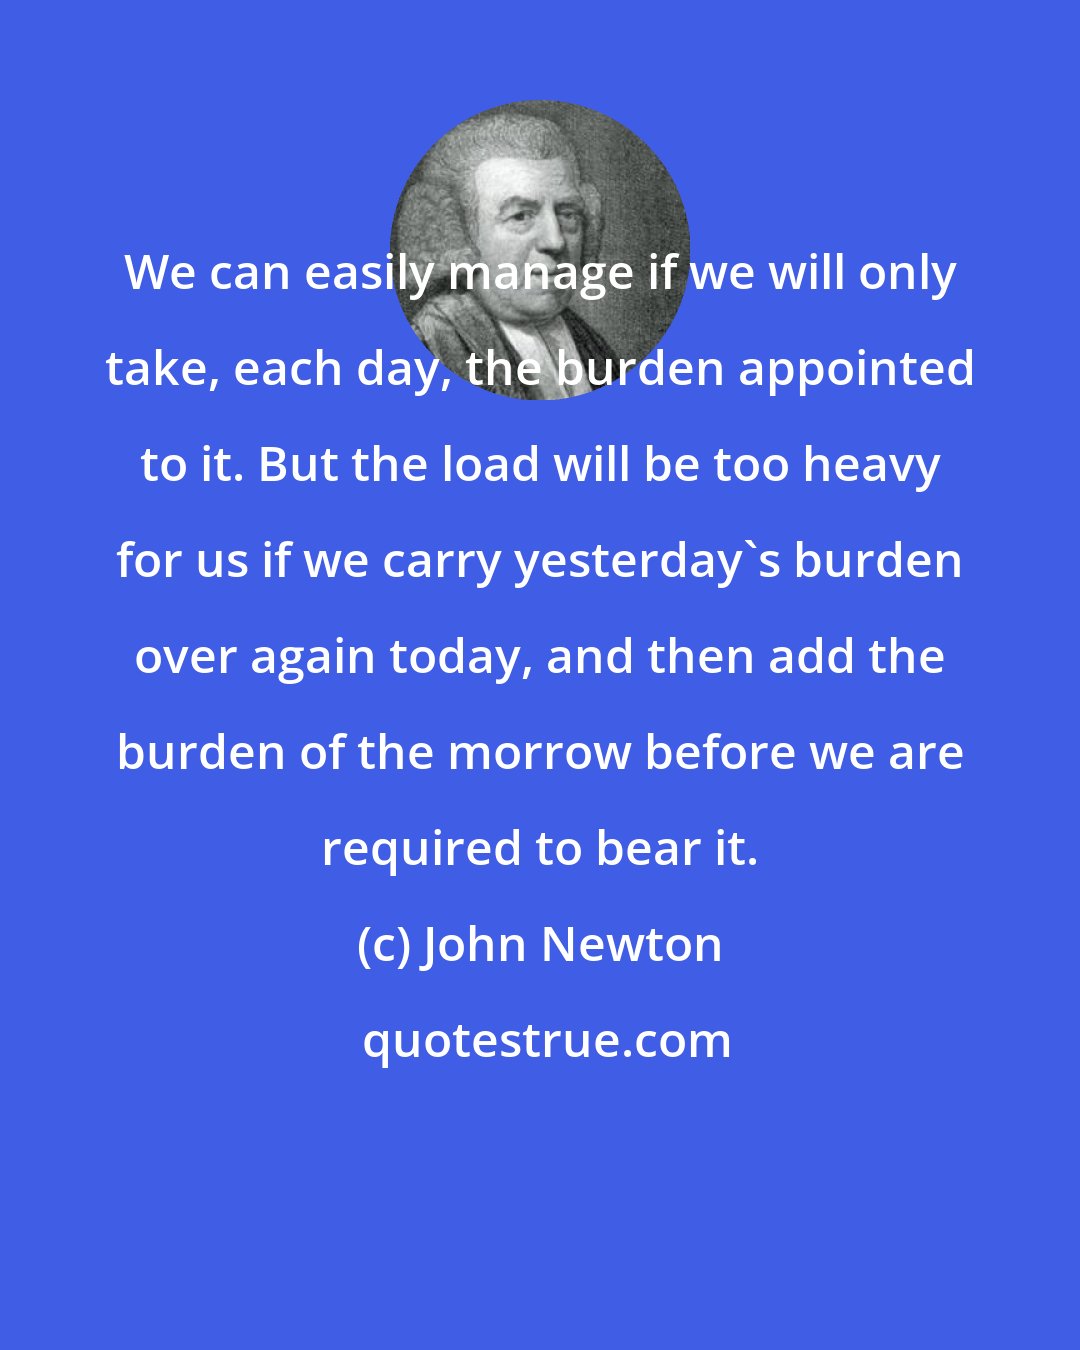 John Newton: We can easily manage if we will only take, each day, the burden appointed to it. But the load will be too heavy for us if we carry yesterday's burden over again today, and then add the burden of the morrow before we are required to bear it.